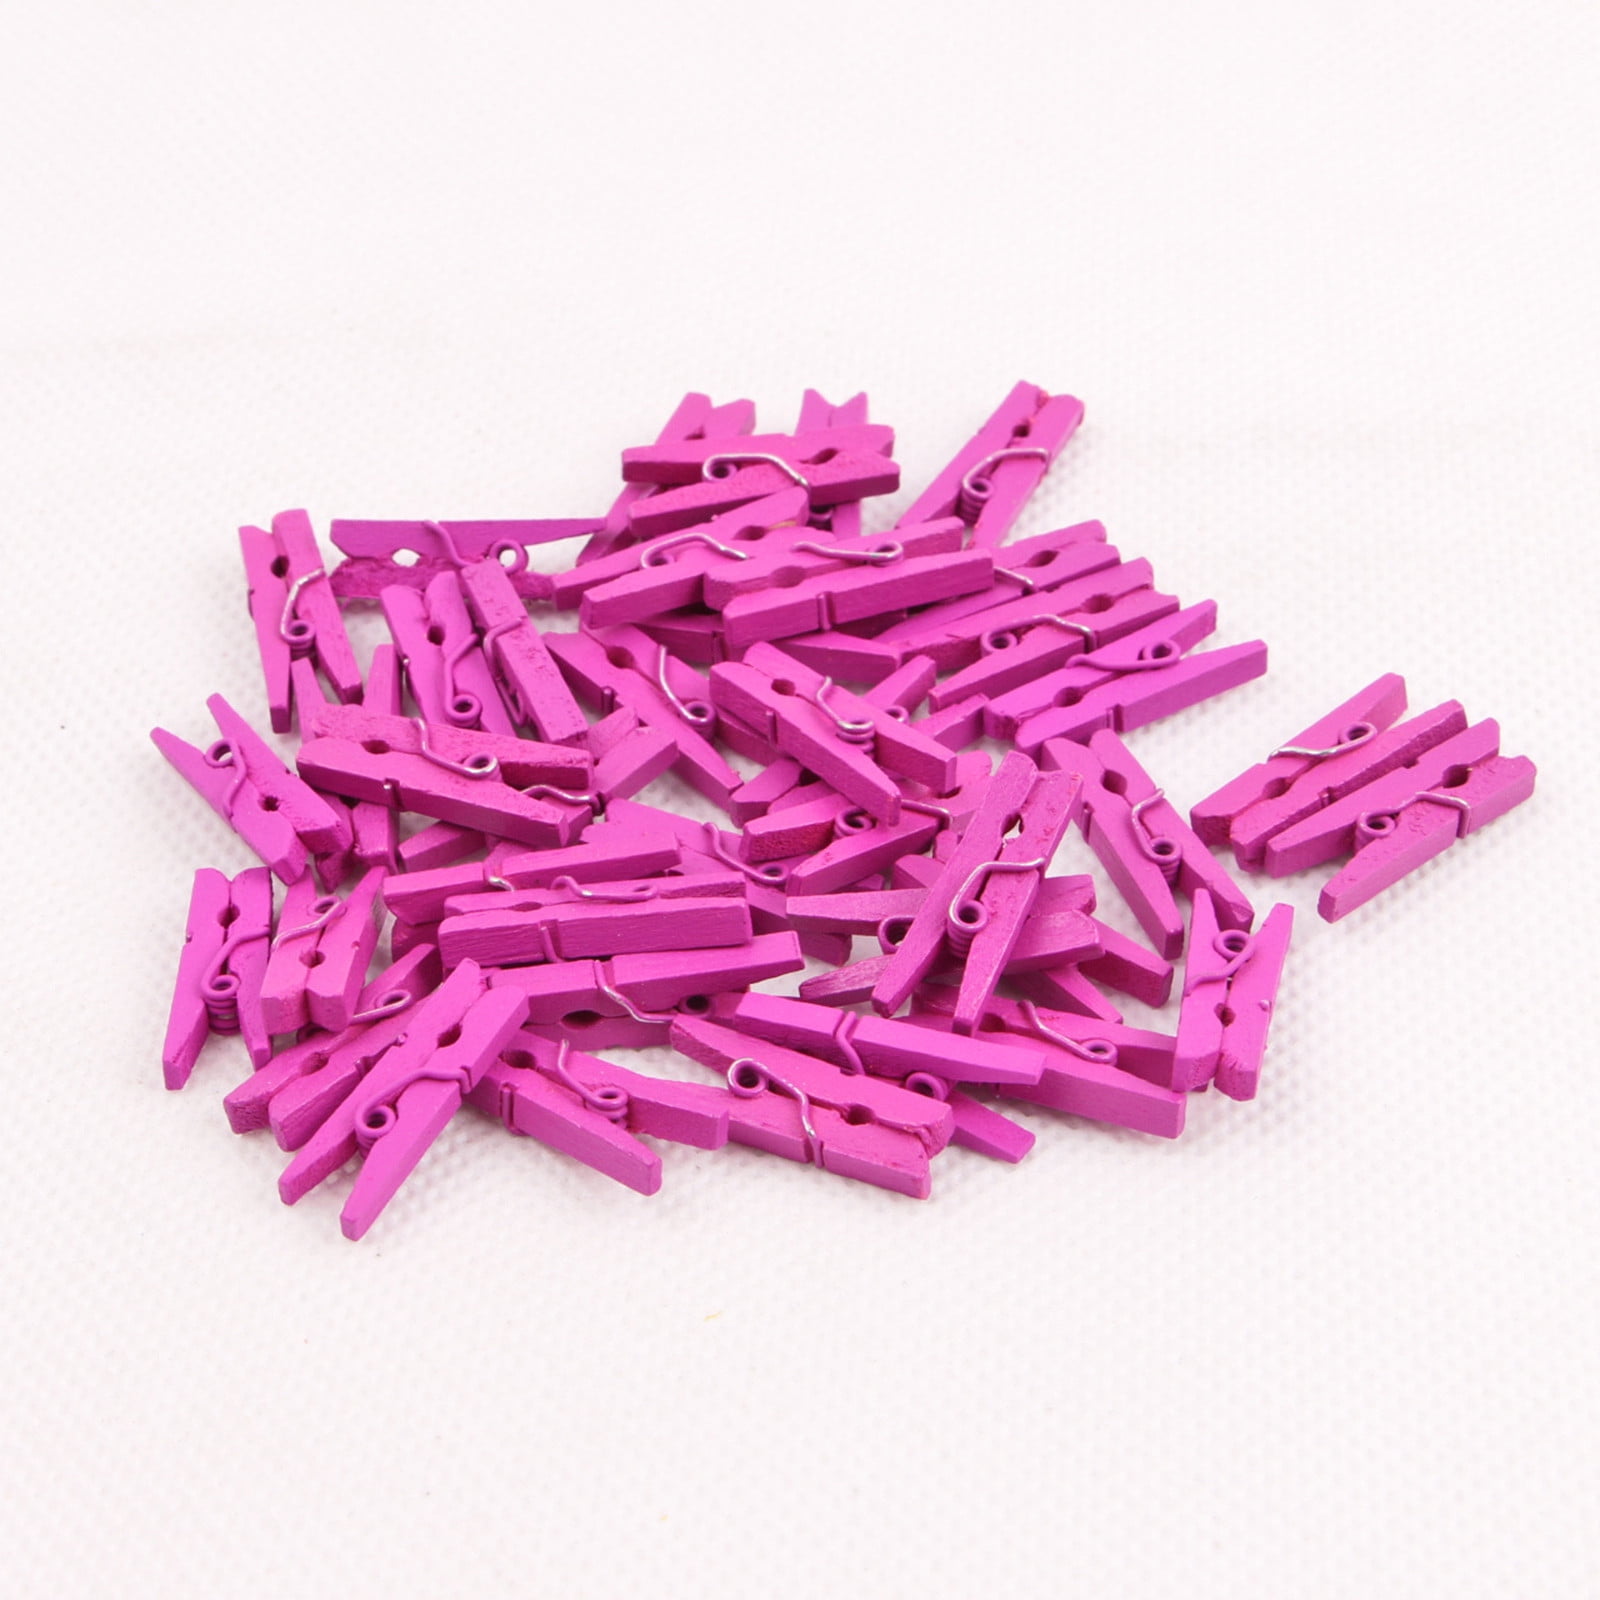 Mini Clothes Pins For Photo - 50pcs 25mm Colorful Natural Wood